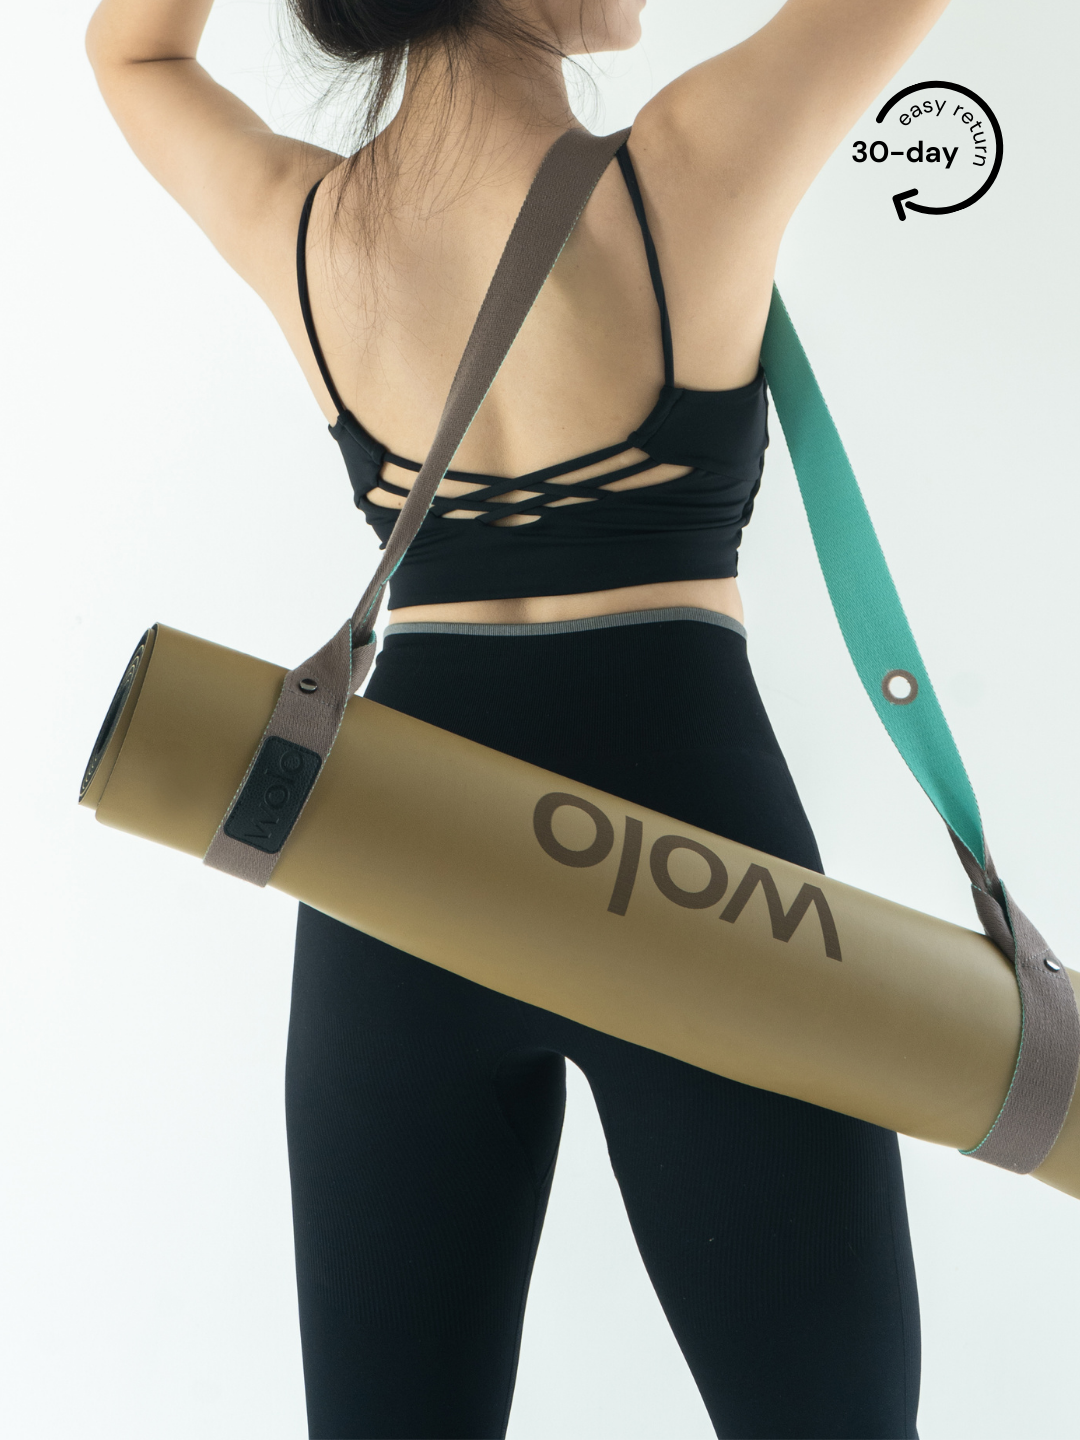 Lady carry a khaki yoga mat with a mint green mat carry strap